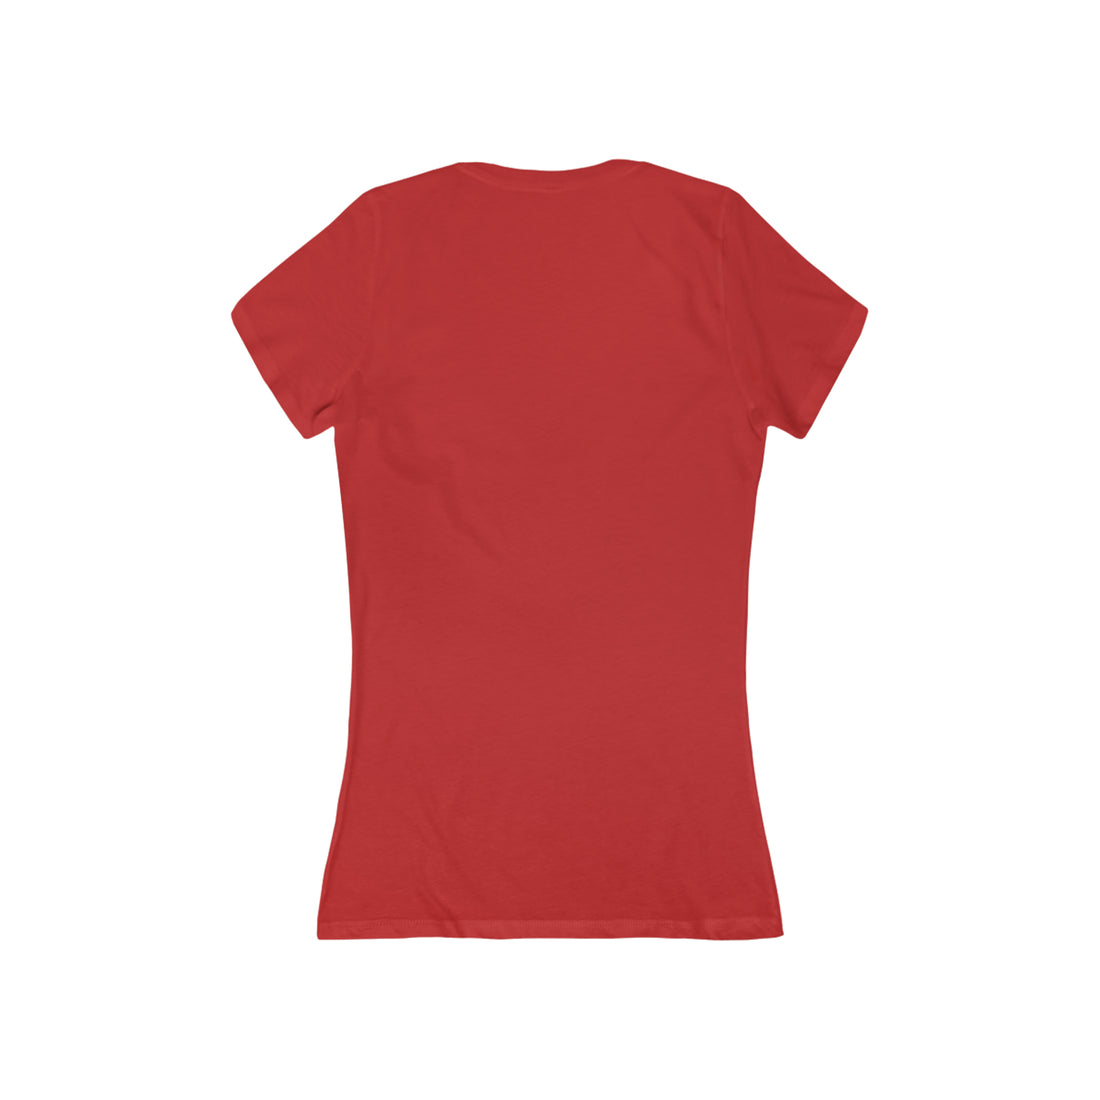 Women's Jersey Game Over V-Neck Tee